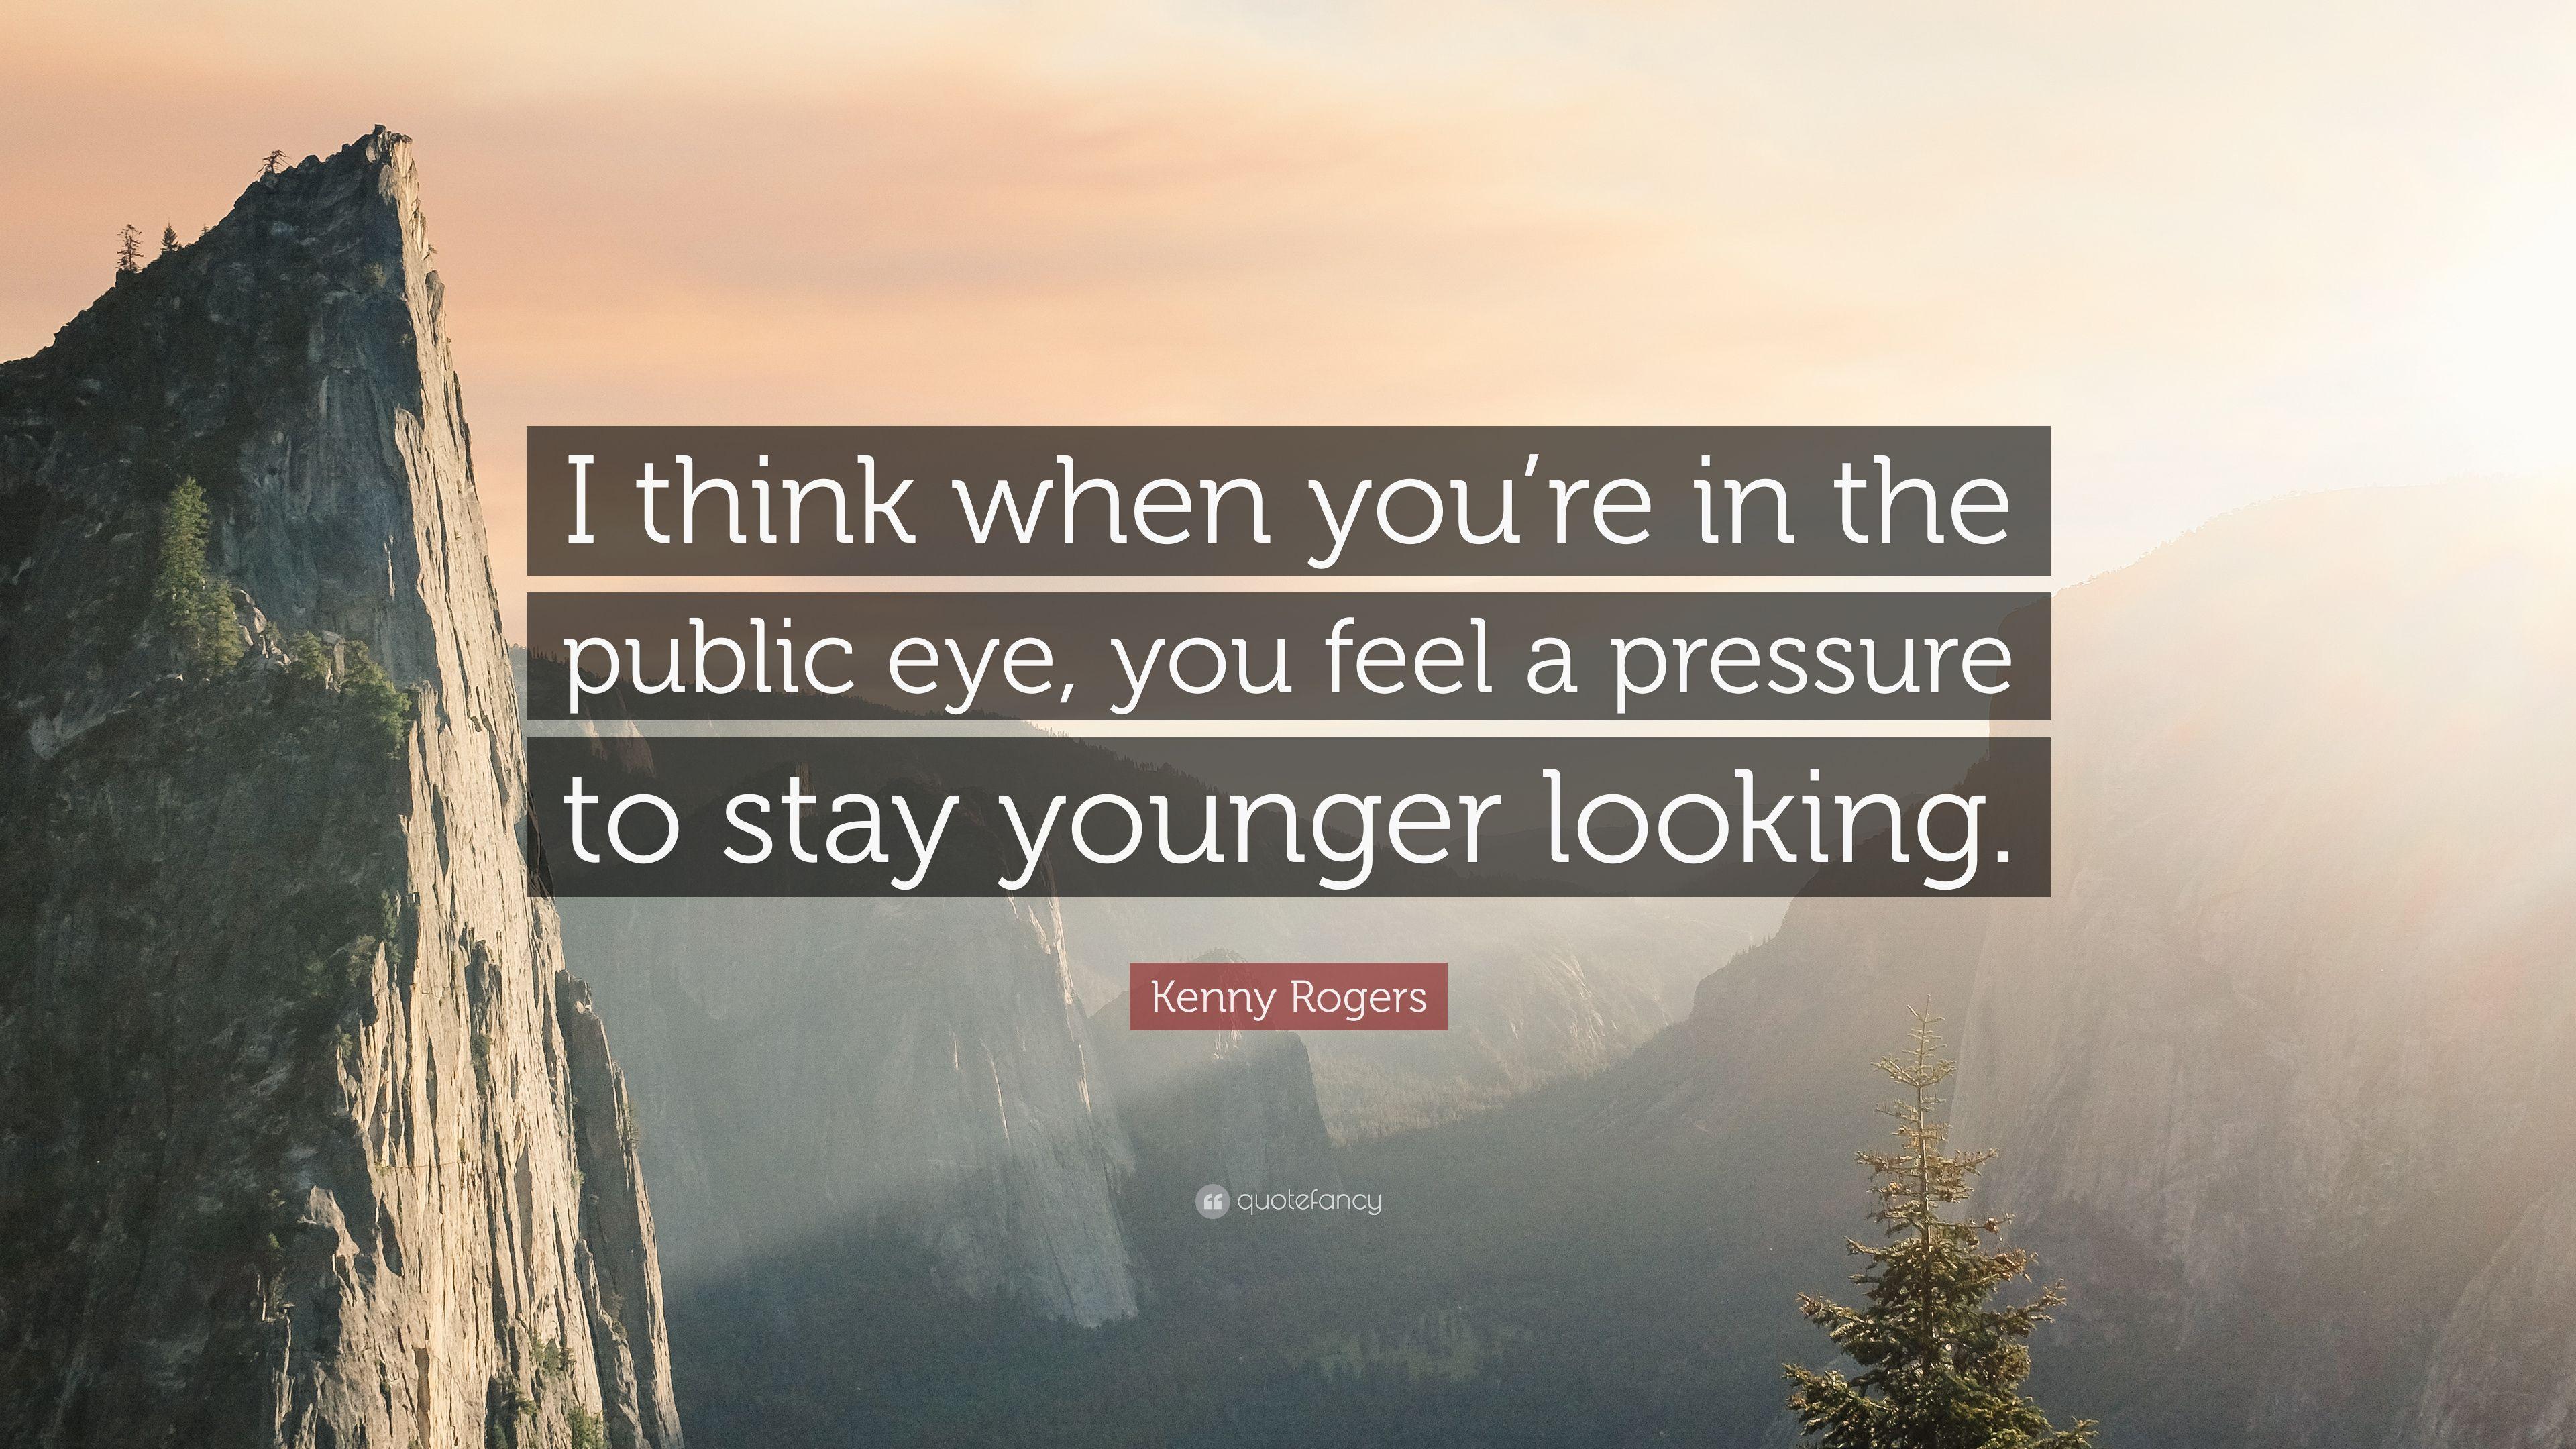 Kenny Rogers Quote: “I think when you're in the public eye, you